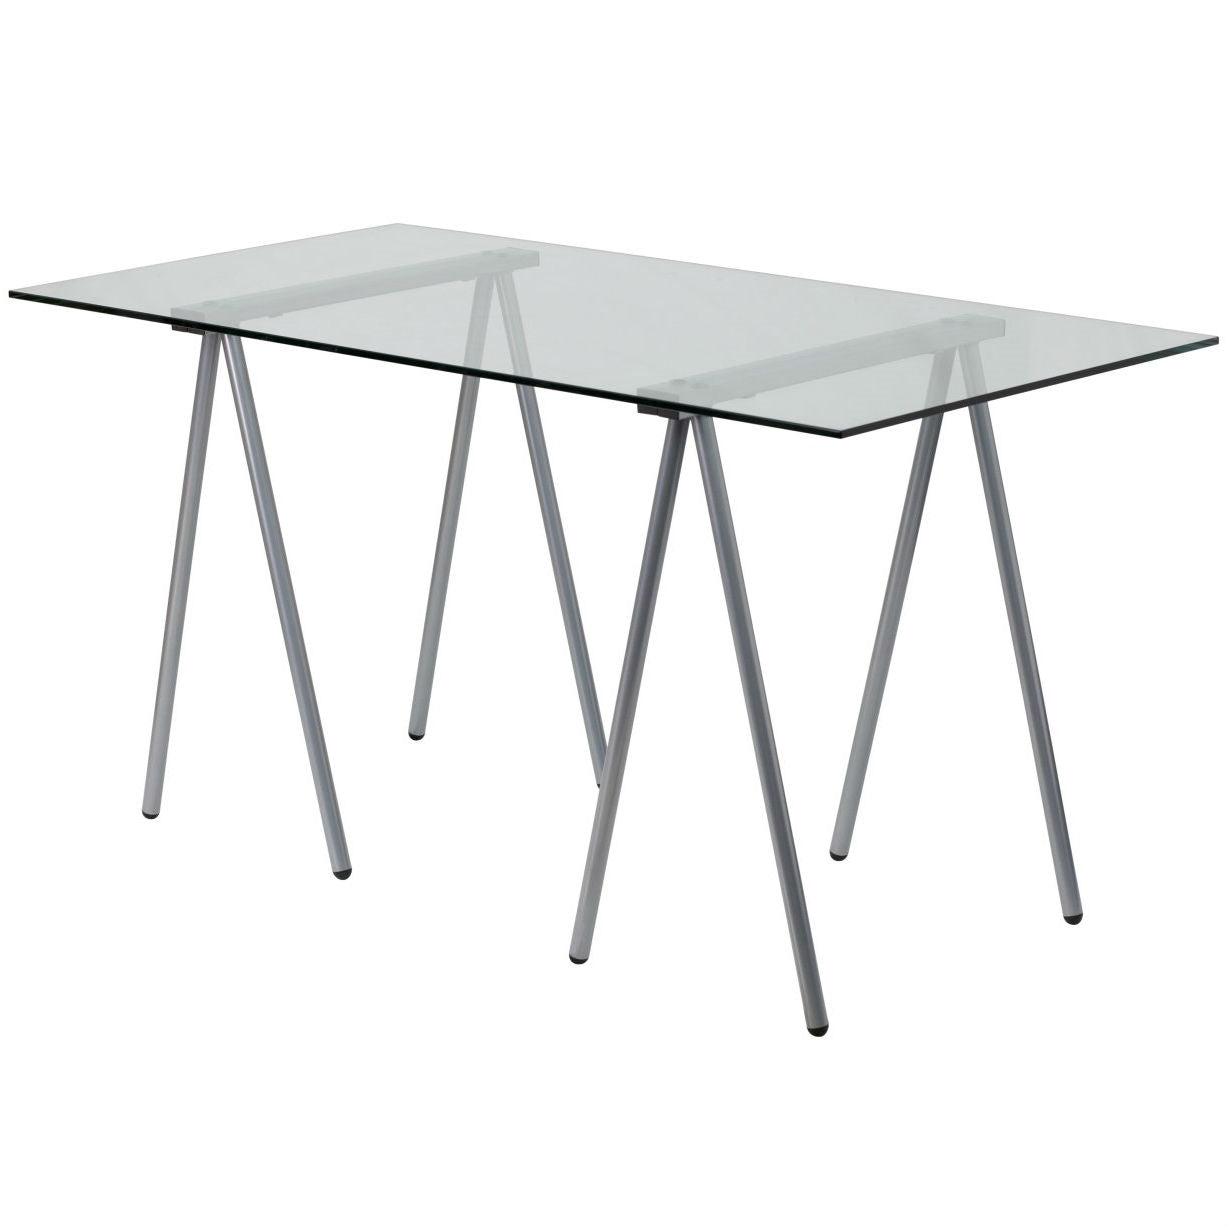 FastFurnishings Modern Clear Tempered Glass Top Writing Table Computer Desk with Metal Legs